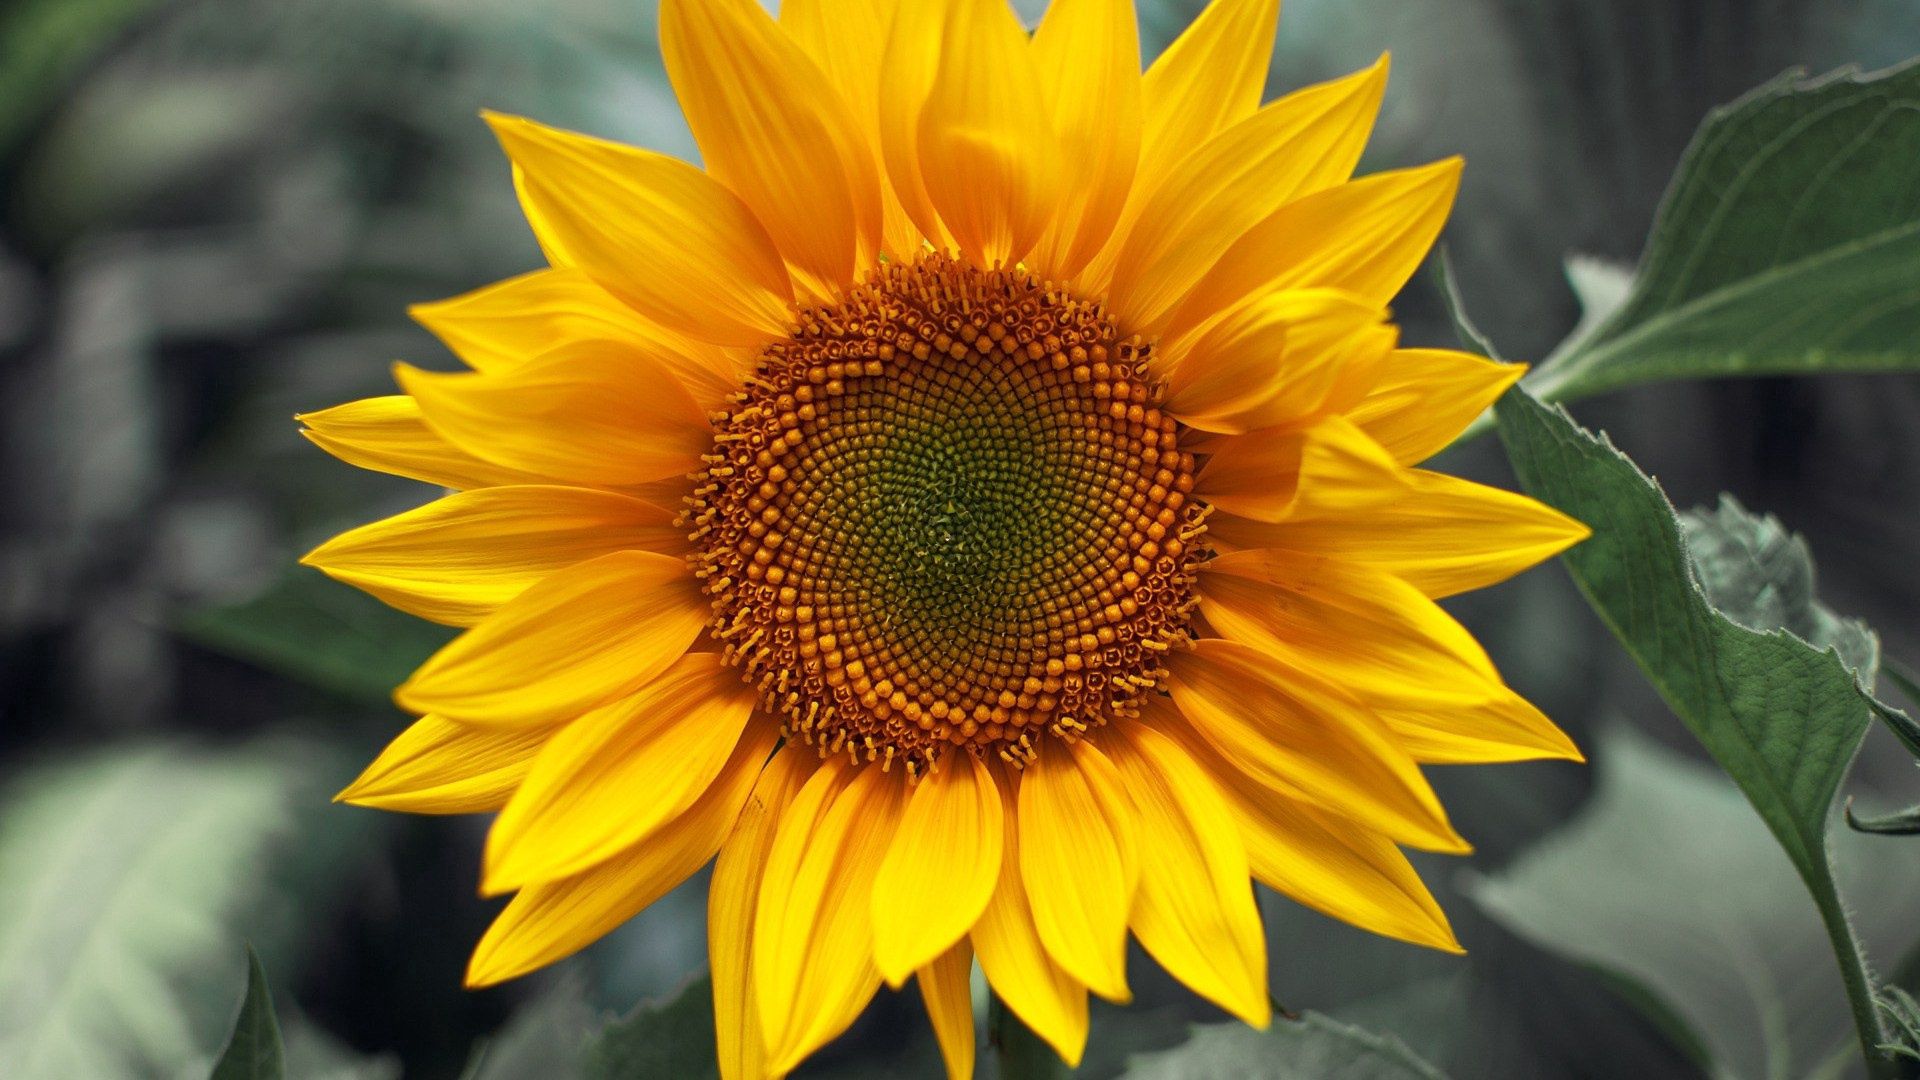 1080p Sunflower Hd Images